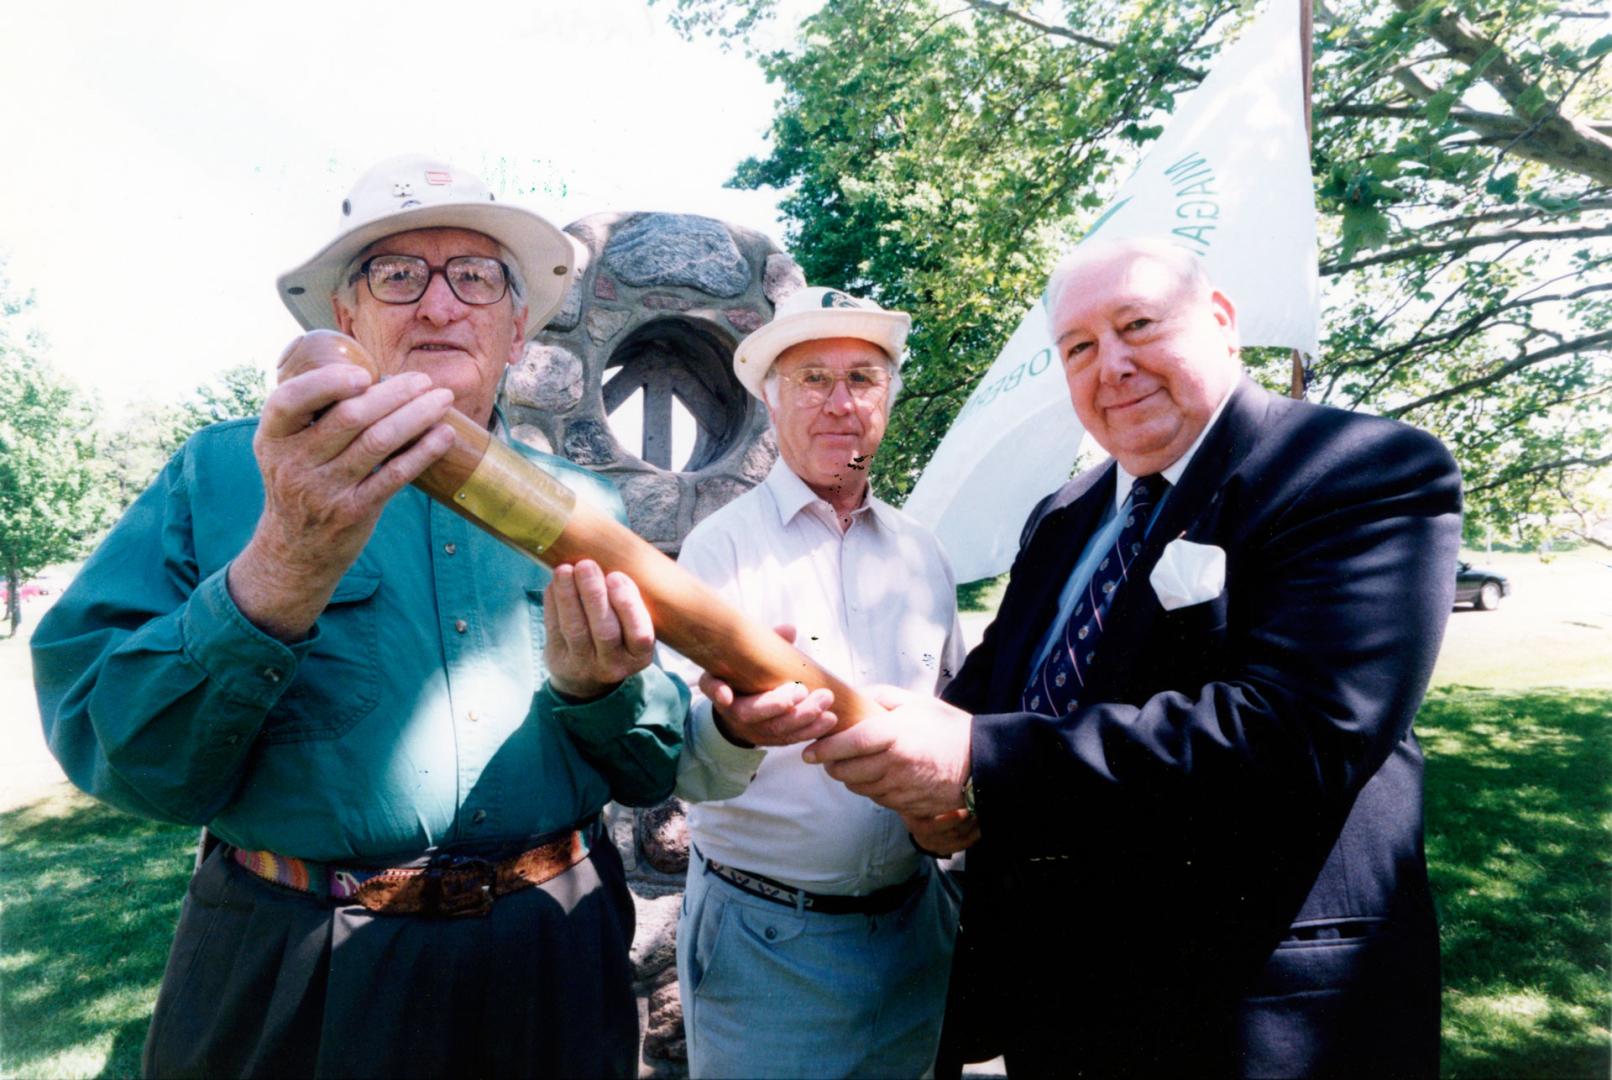 Ray Lowes, Phil Gosling, and Norman Pearson hold up the Bruce Trail baton. Bruce Trail, Ontario